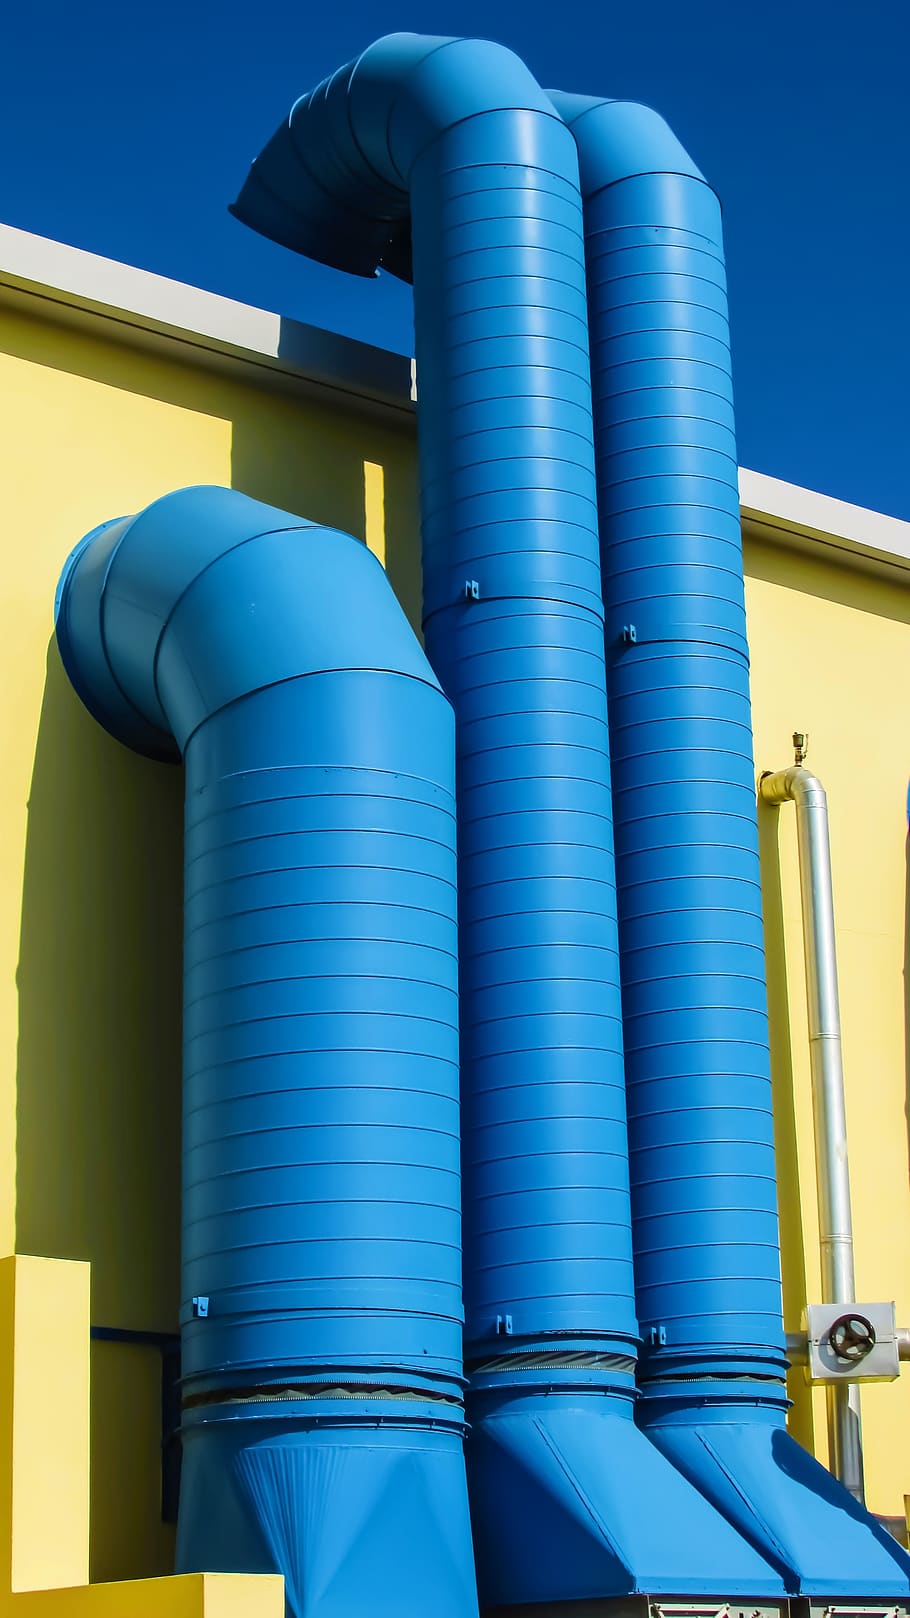 boiler, chimney, pipe, blue, structure, metal, factory, industry